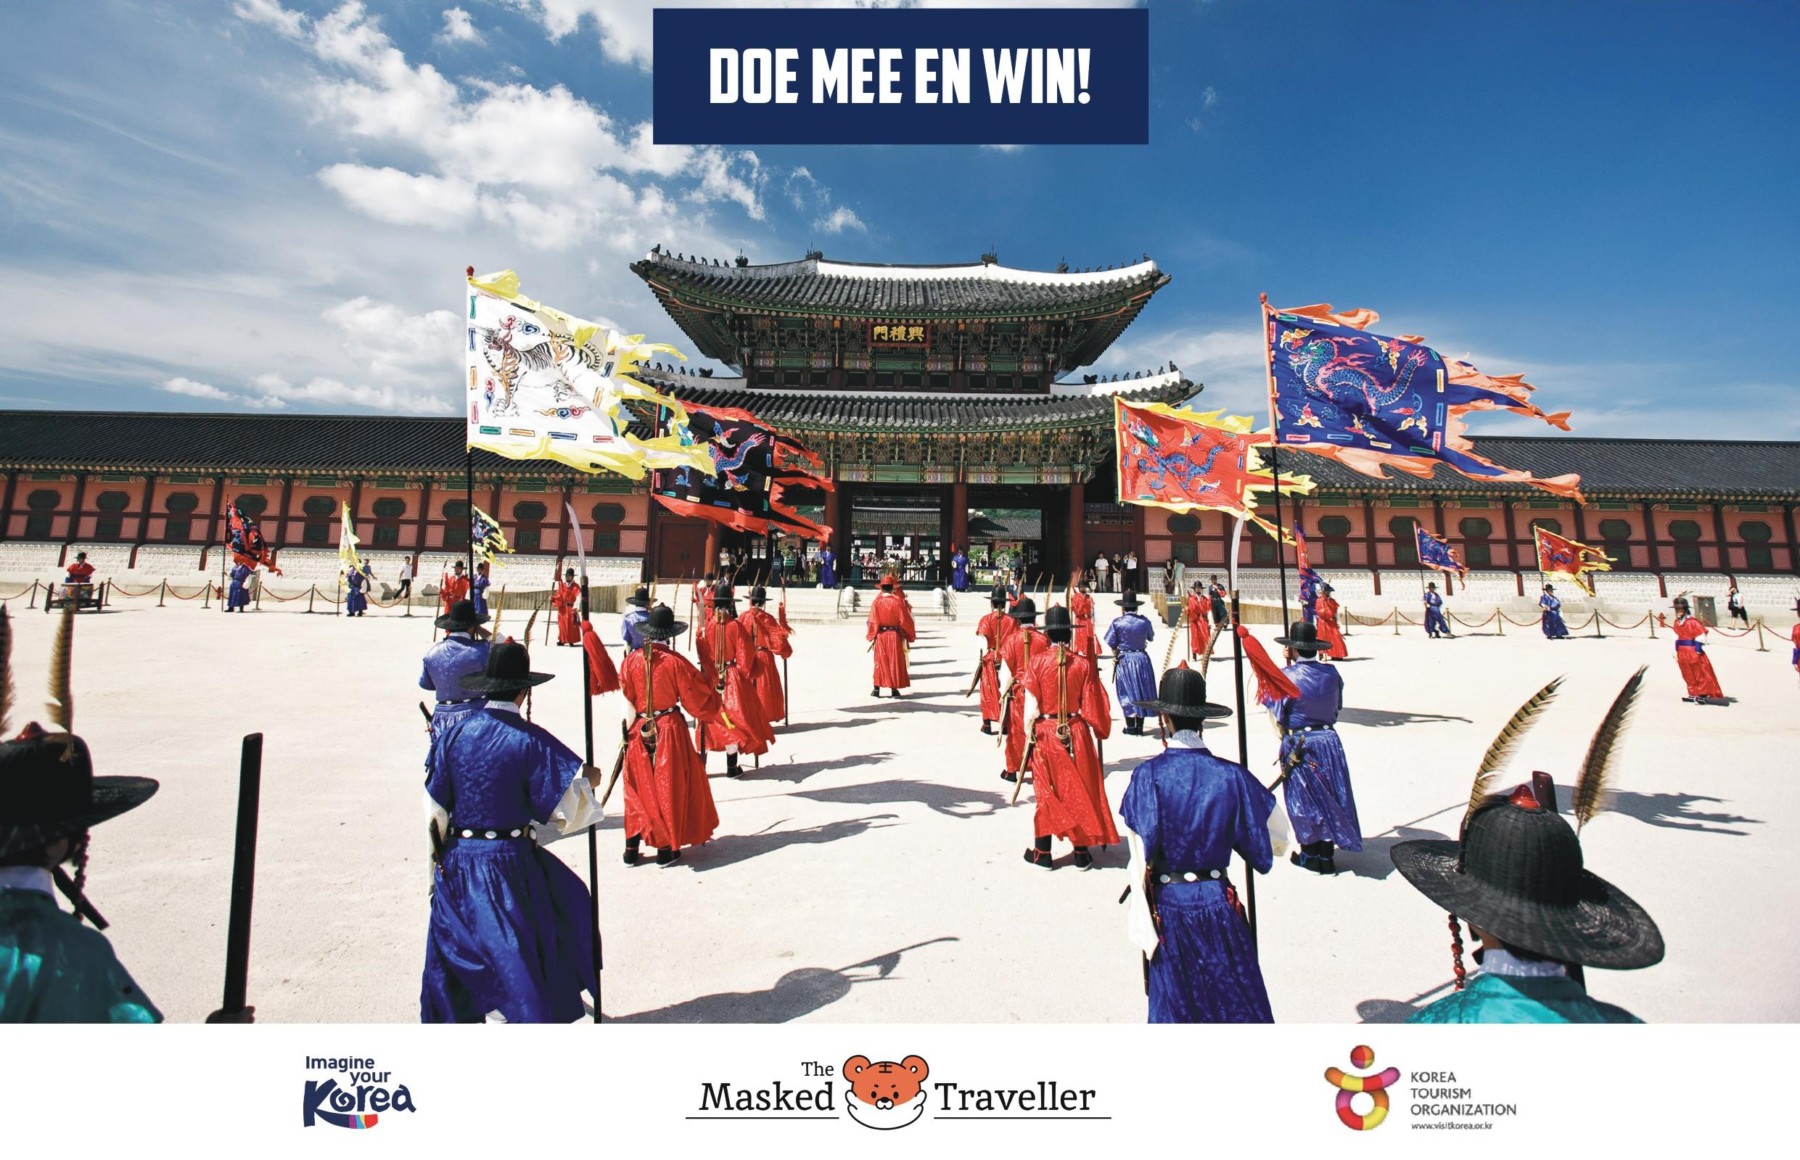 Multi-channel campaign for Korea Tourism Organisation in Netherlands